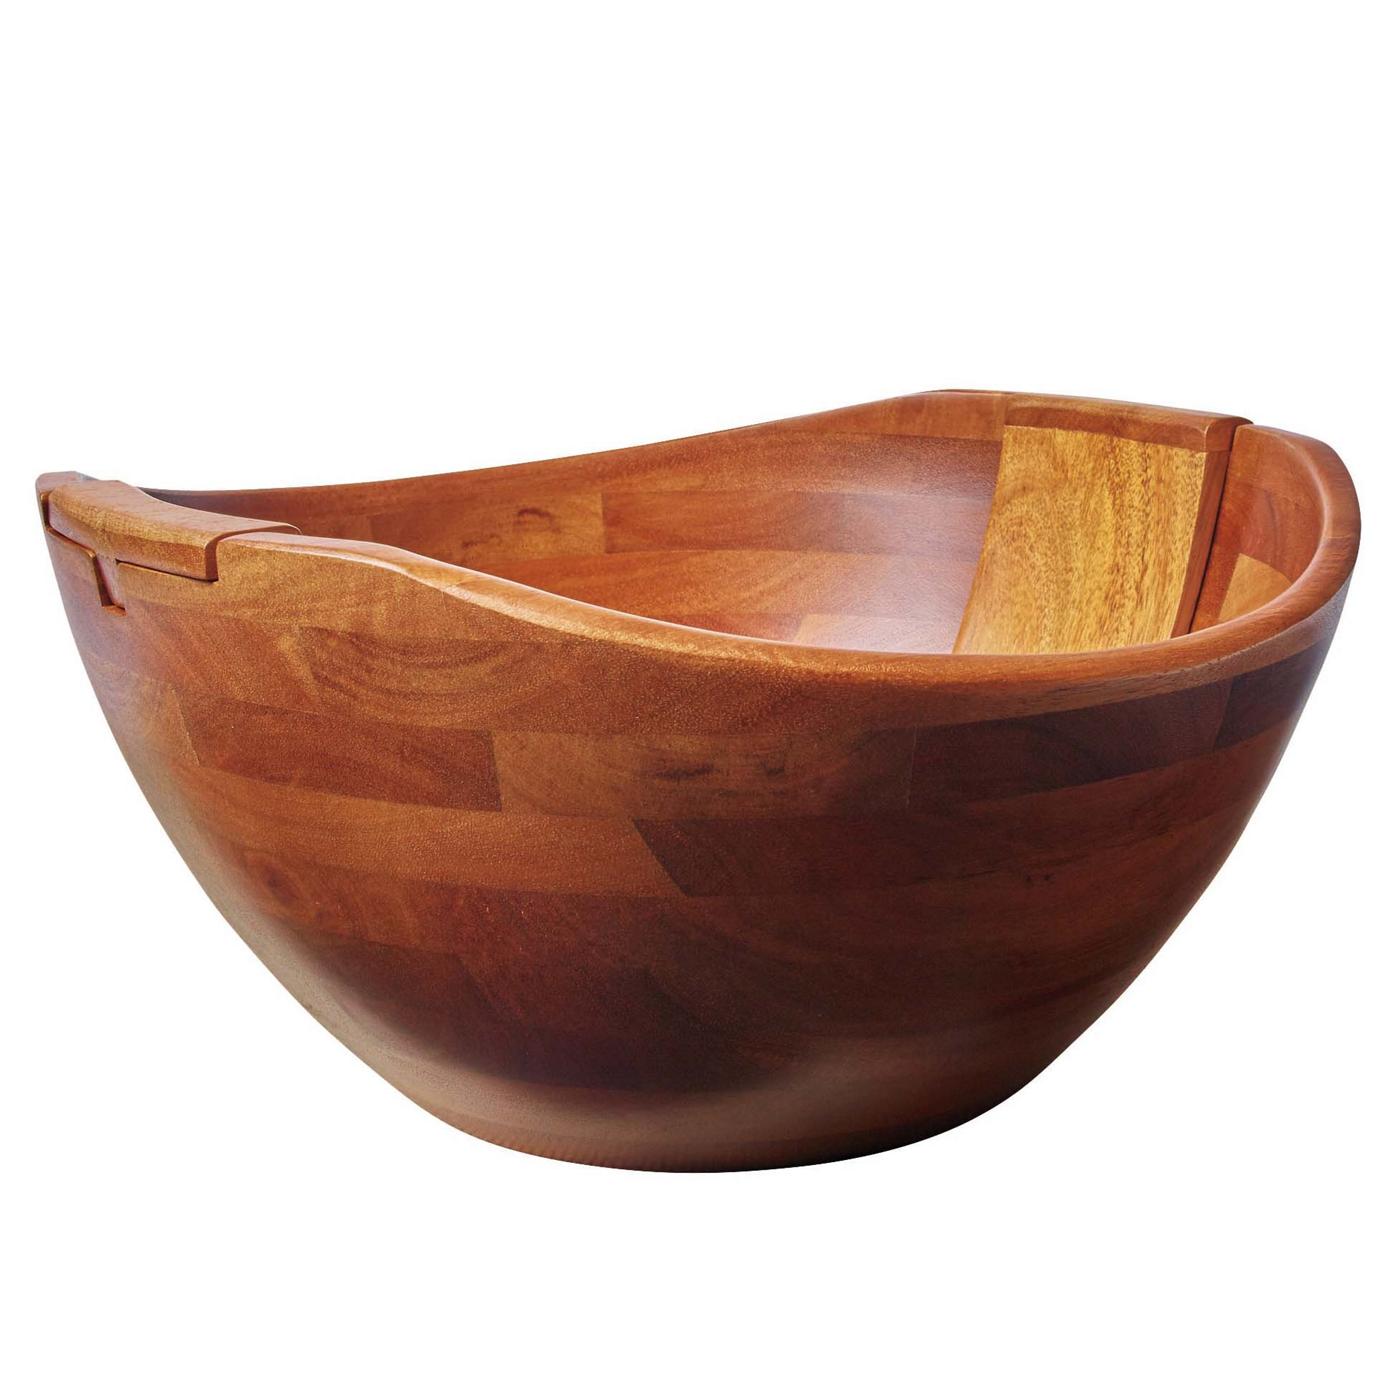 Kitchen & Table by H-E-B Acacia Large Salad Bowl with Server; image 2 of 2